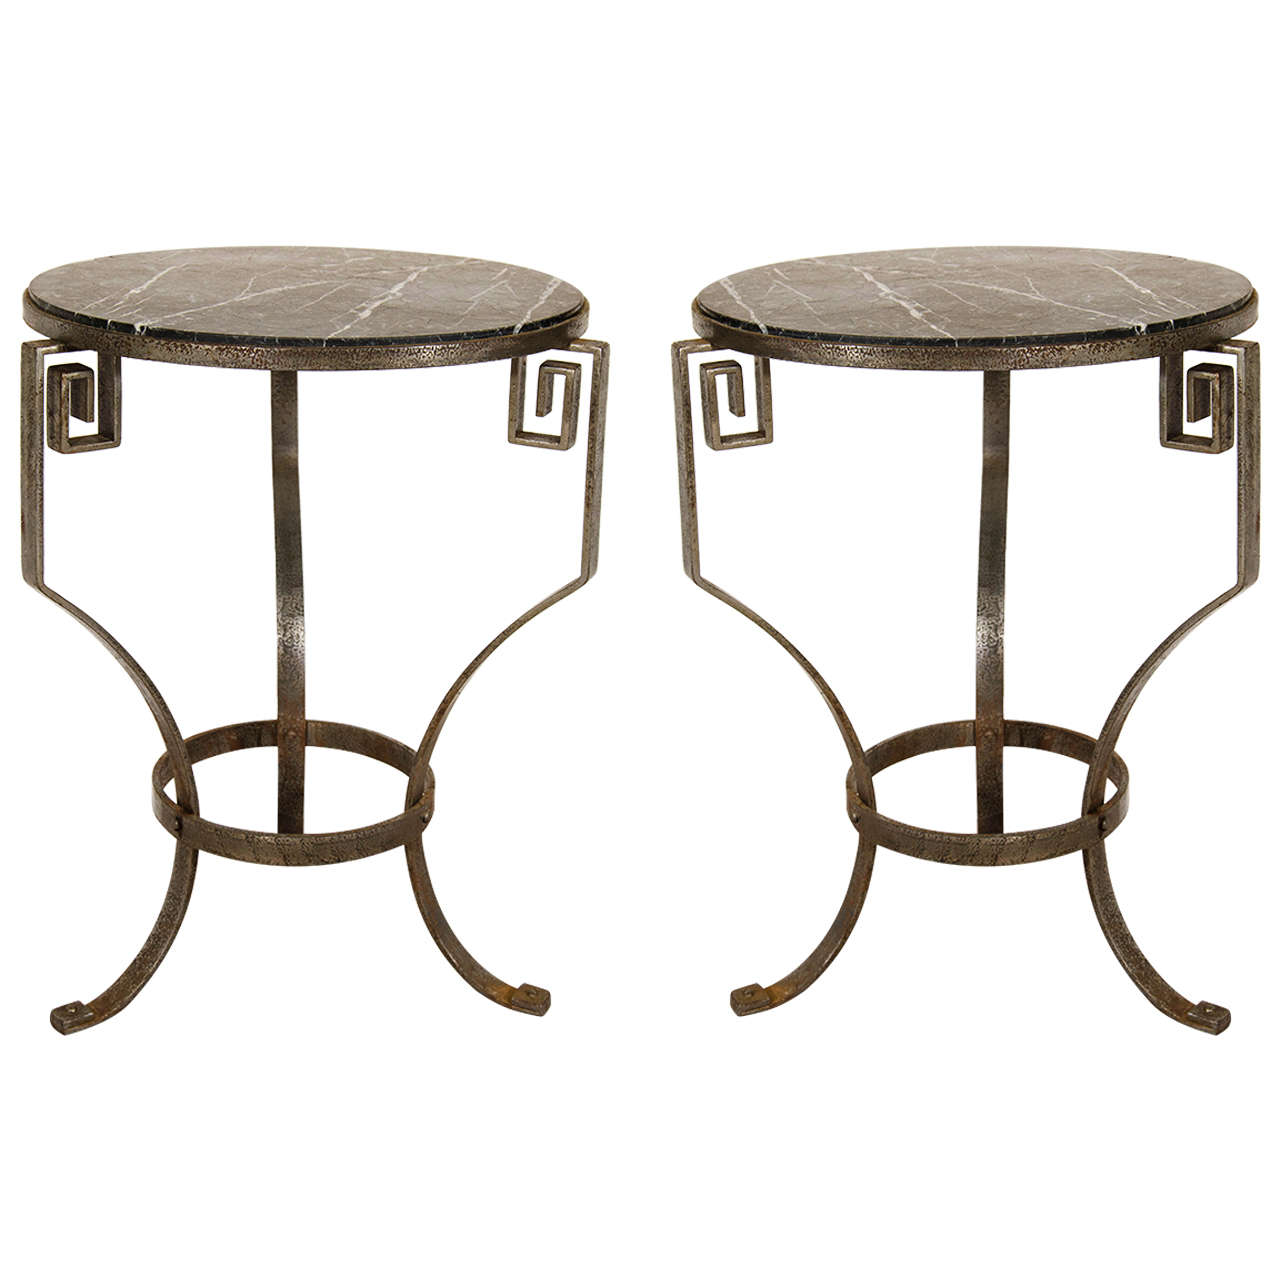  Incredible Art Deco Pair of Black Marble & Iron Greek Key Accent Tables For Sale